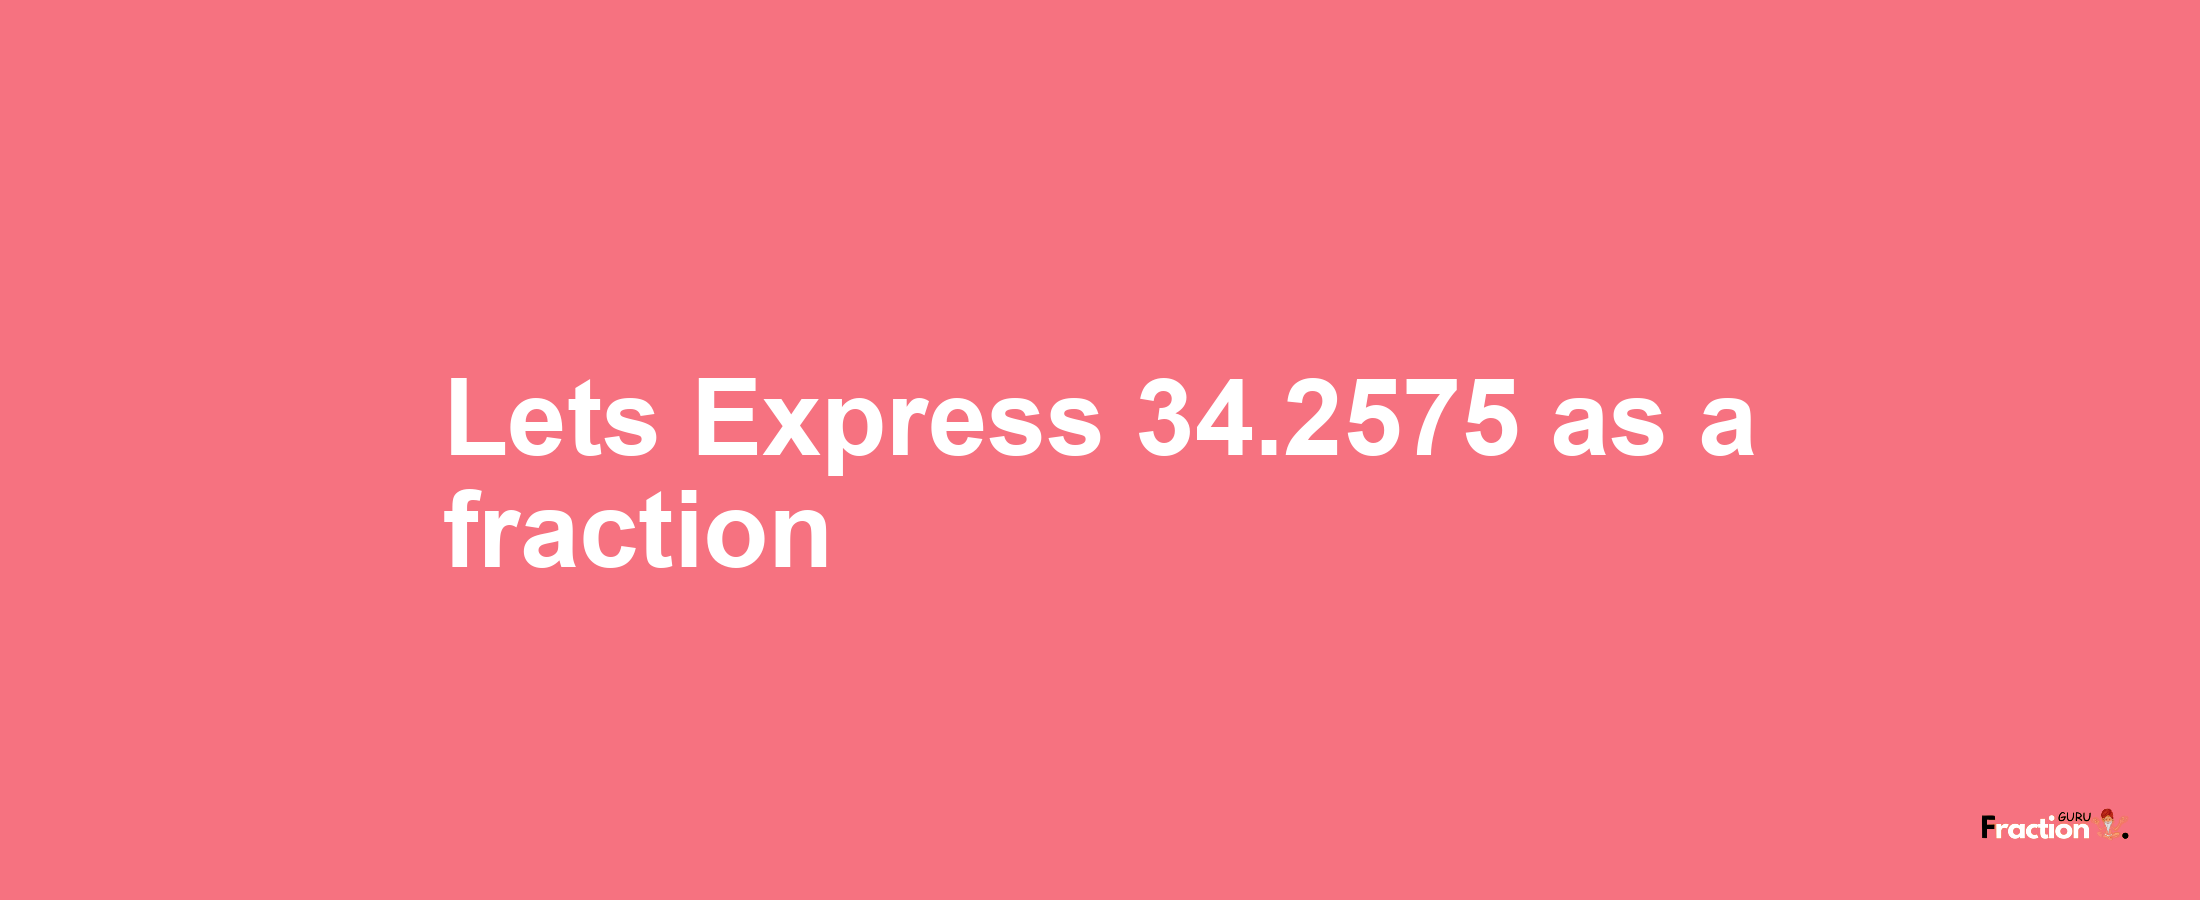 Lets Express 34.2575 as afraction